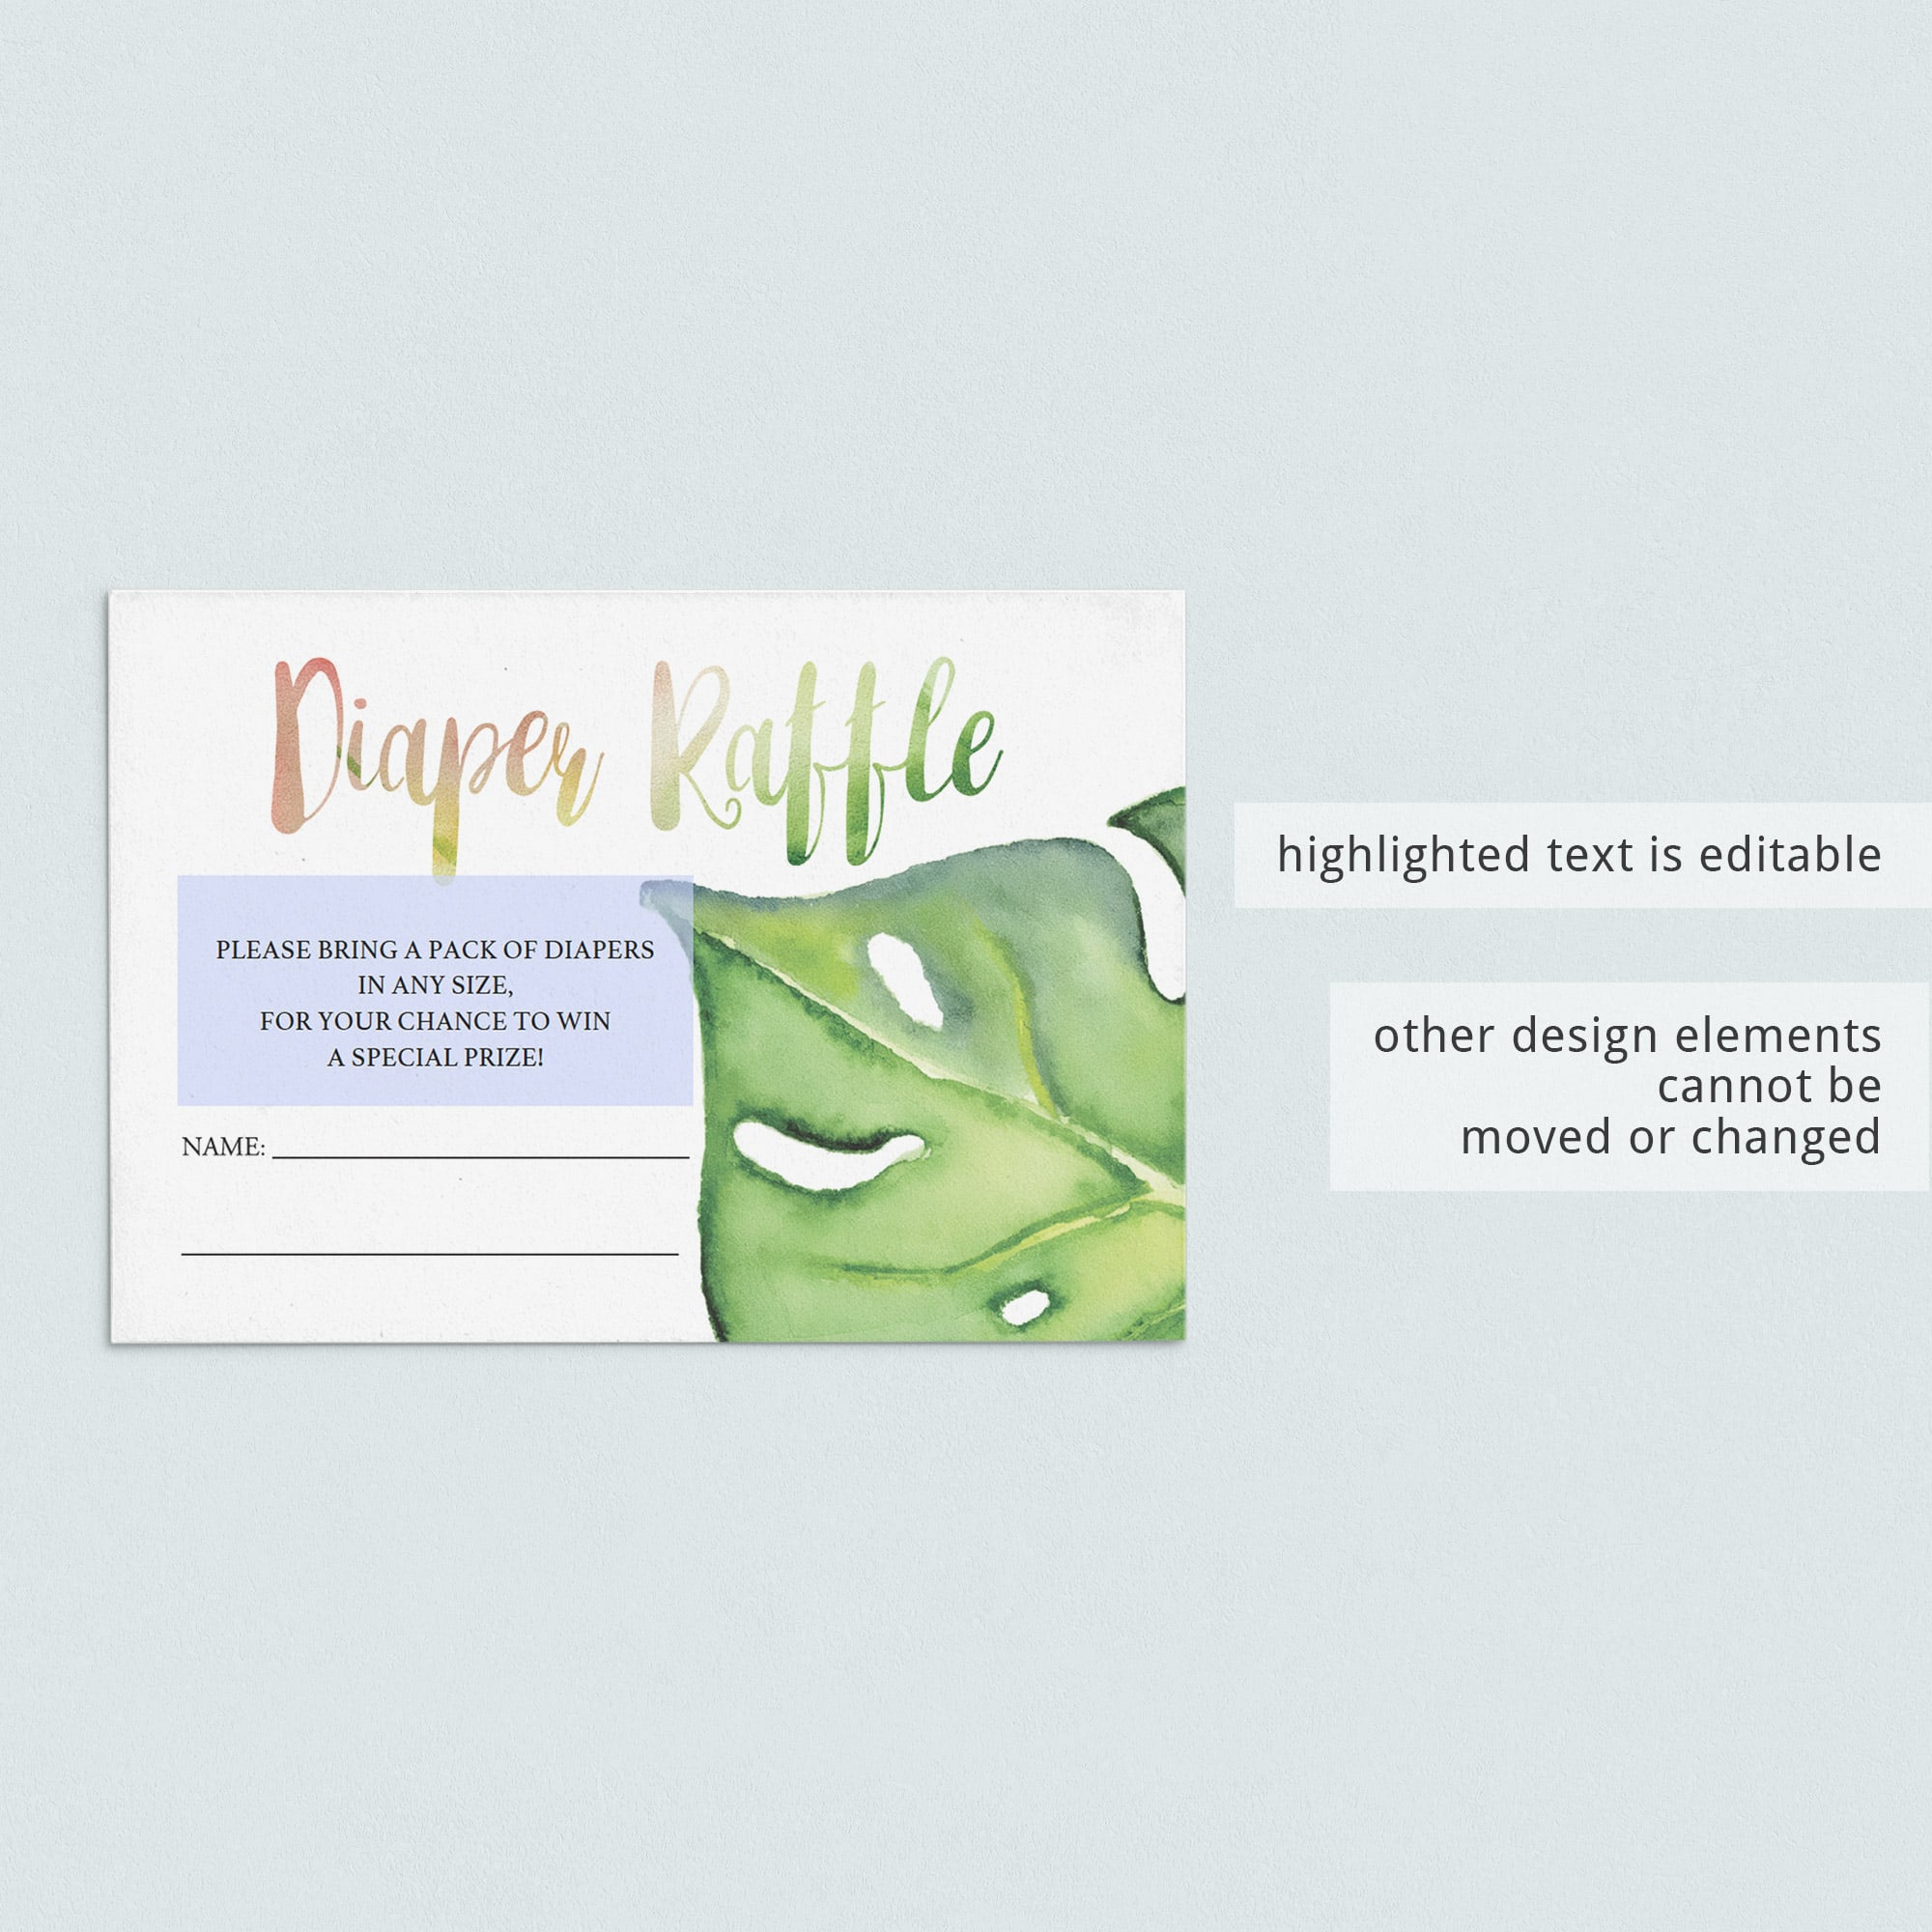 Watercolor Diaper Raffle Cards PDF Template by LittleSizzle